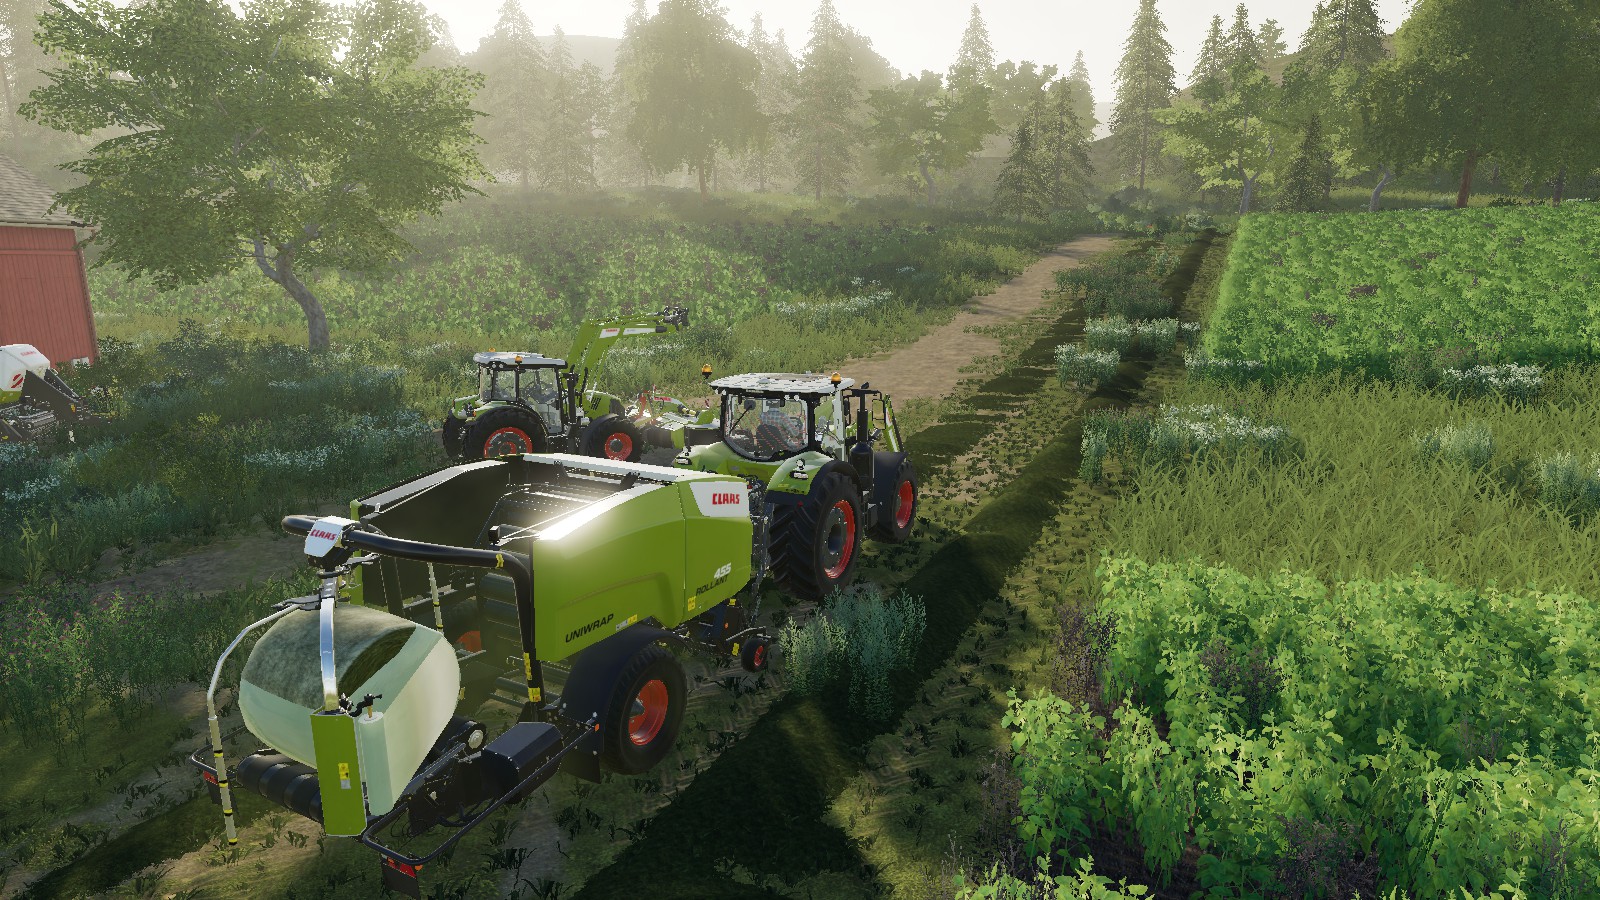 Ranch Simulator allows farming and tractor driving, ahead of its